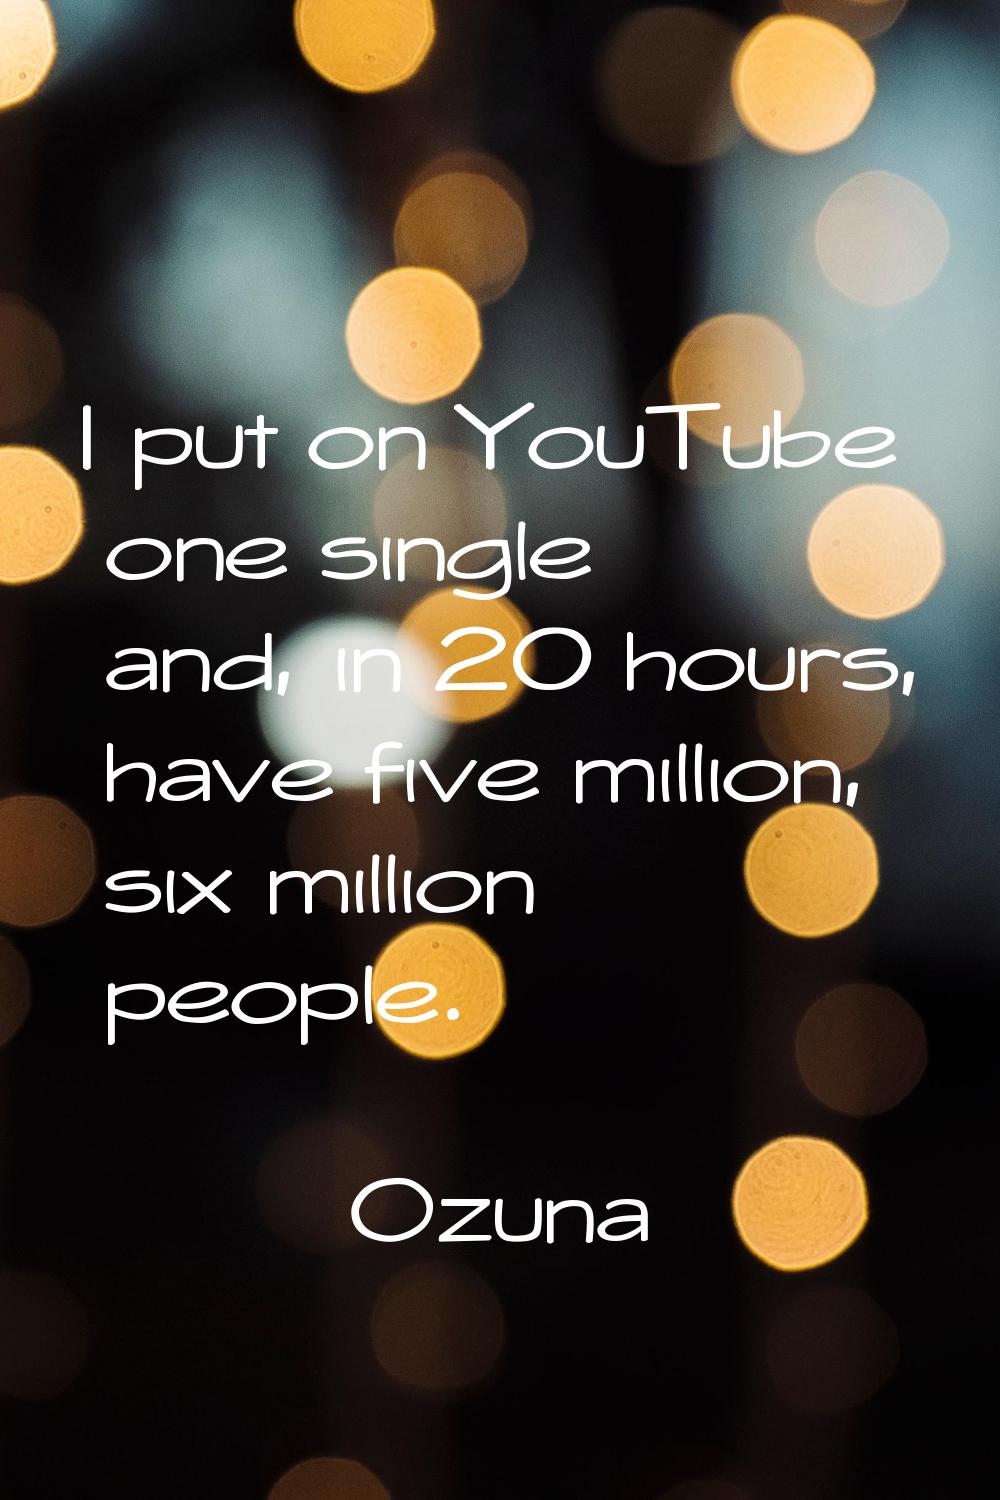 I put on YouTube one single and, in 20 hours, have five million, six million people.